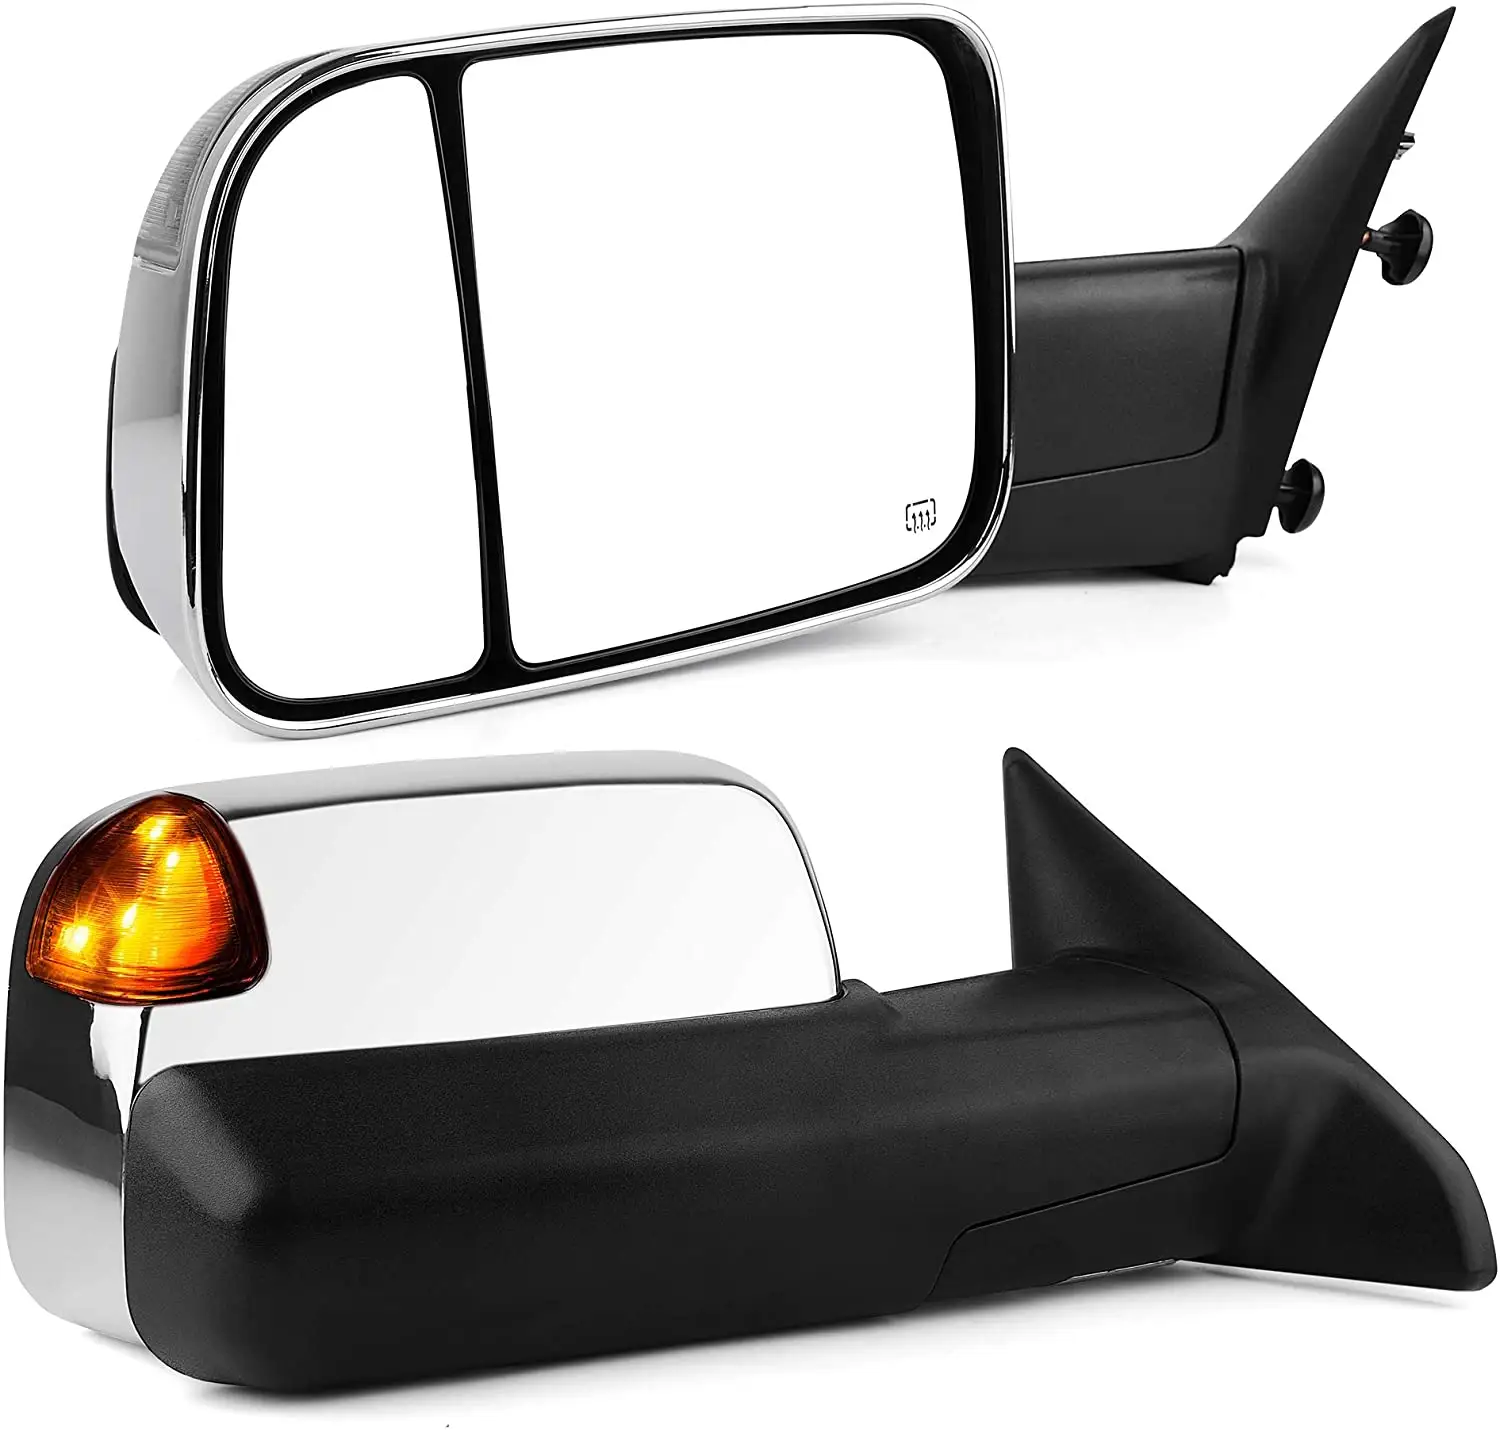 Electric Chrome 2009-18 Dodge Ram 1500, 2010-18 ram 2500 3500 with LED Turn Signal Light,Puddle Lamp pickup side tow mirror